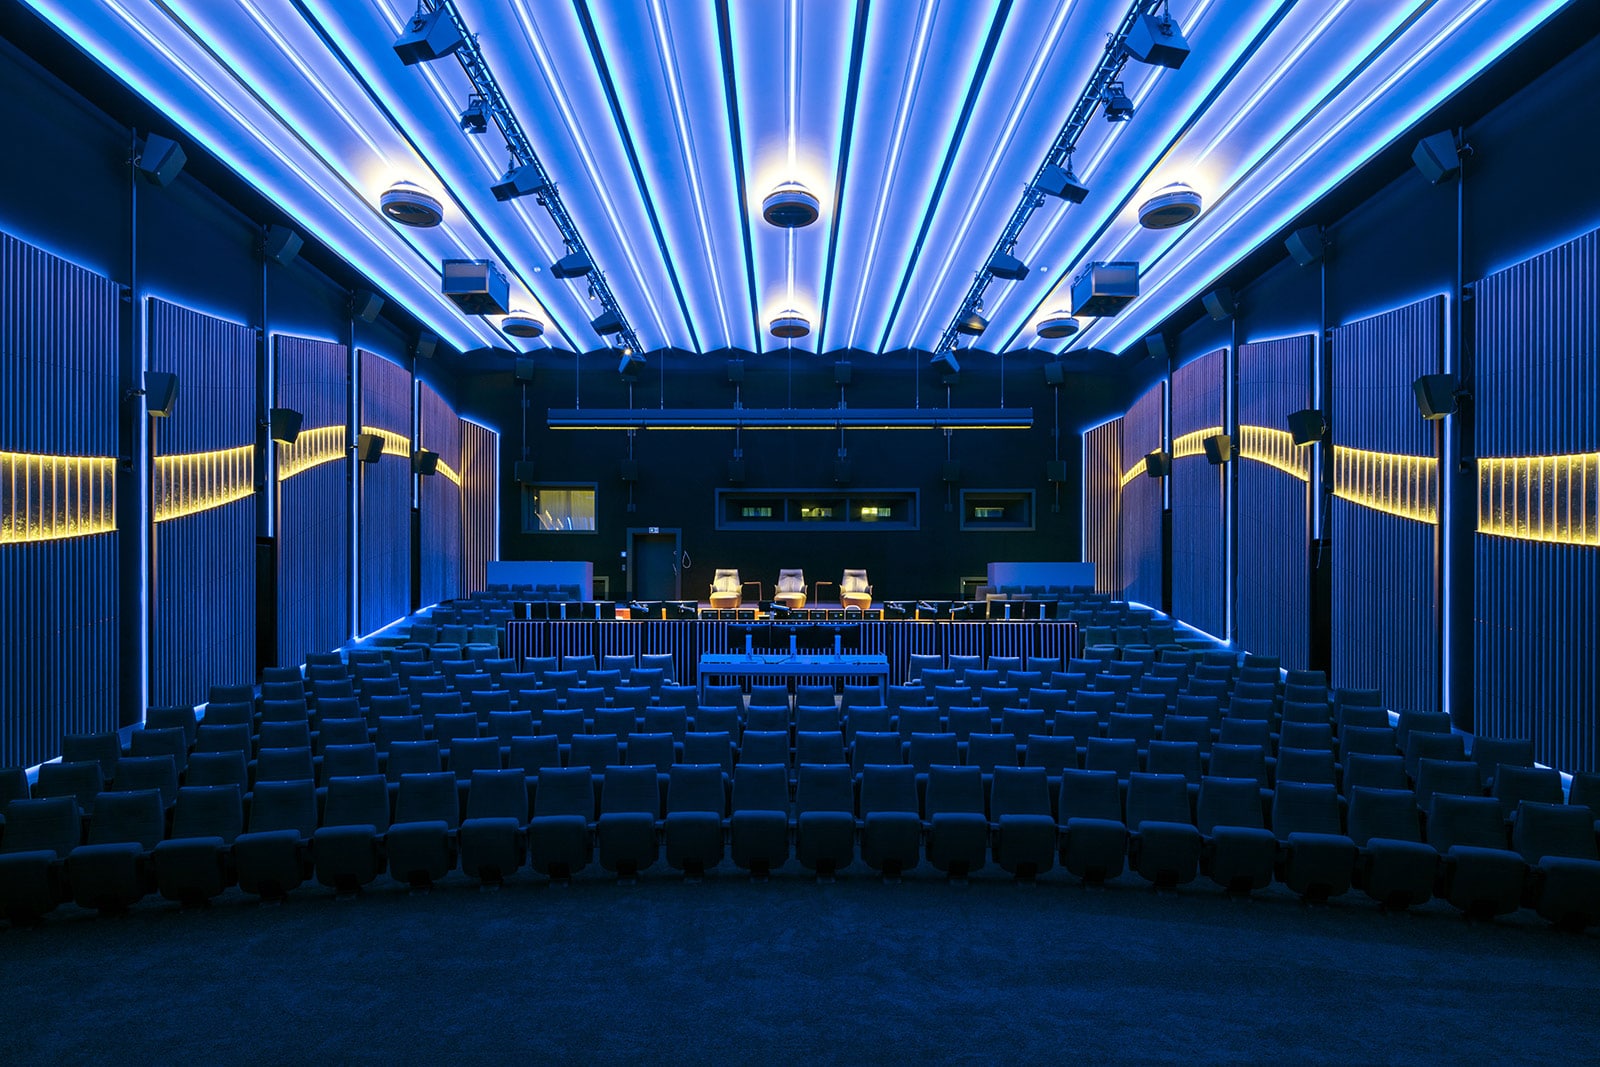 Germany's Rotor Film Selects Meyer Sound for Dolby Atmos and Auro-3D Mixing Stage